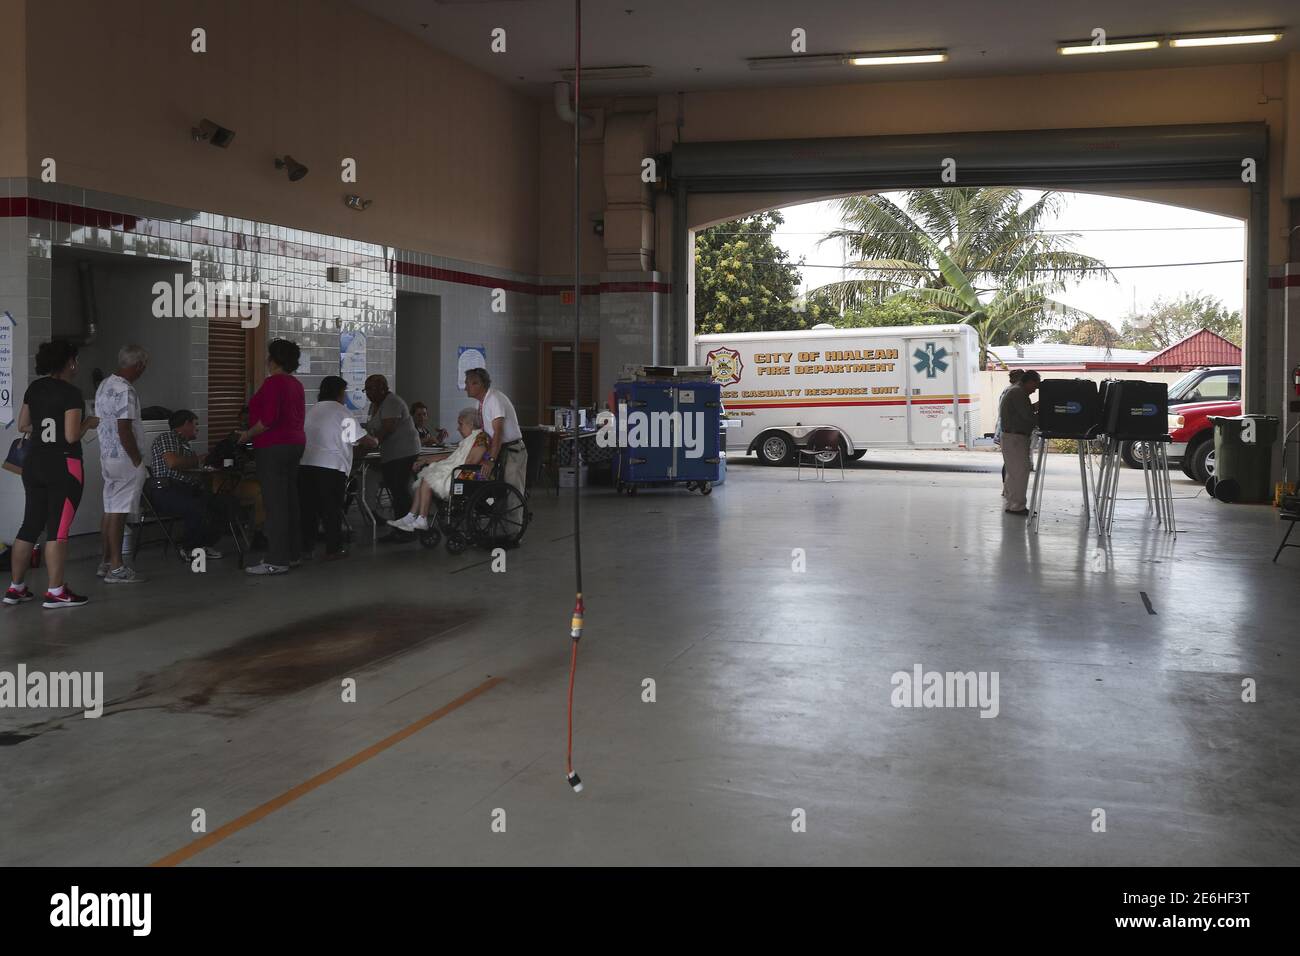 People Cast Their Ballots At A Fire Station Turned Polling Place On Primary Day In Hialeah Florida March 15 16 Reuters Carlo Allegri Stock Photo Alamy